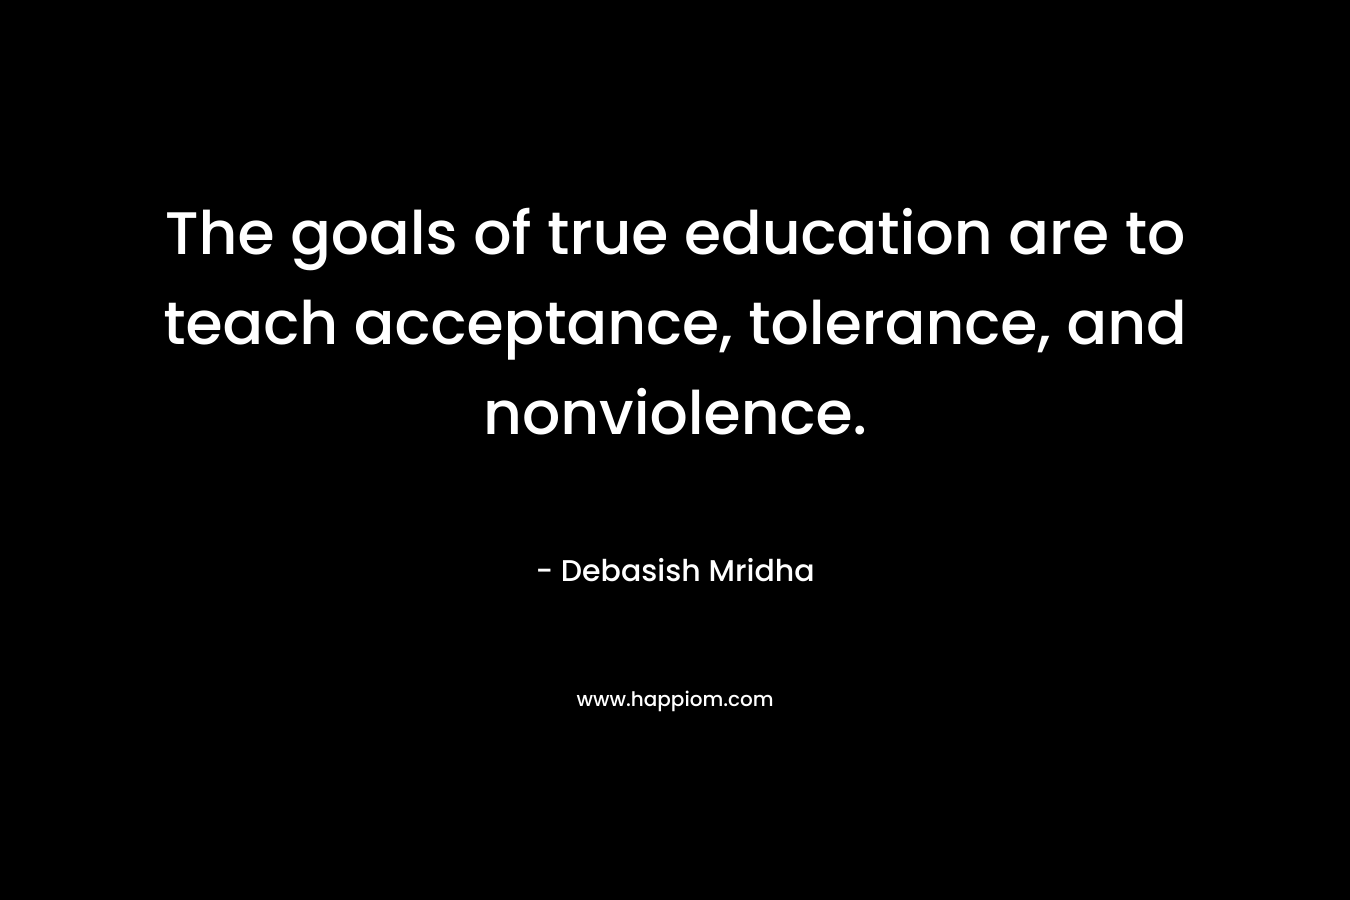 The goals of true education are to teach acceptance, tolerance, and nonviolence.